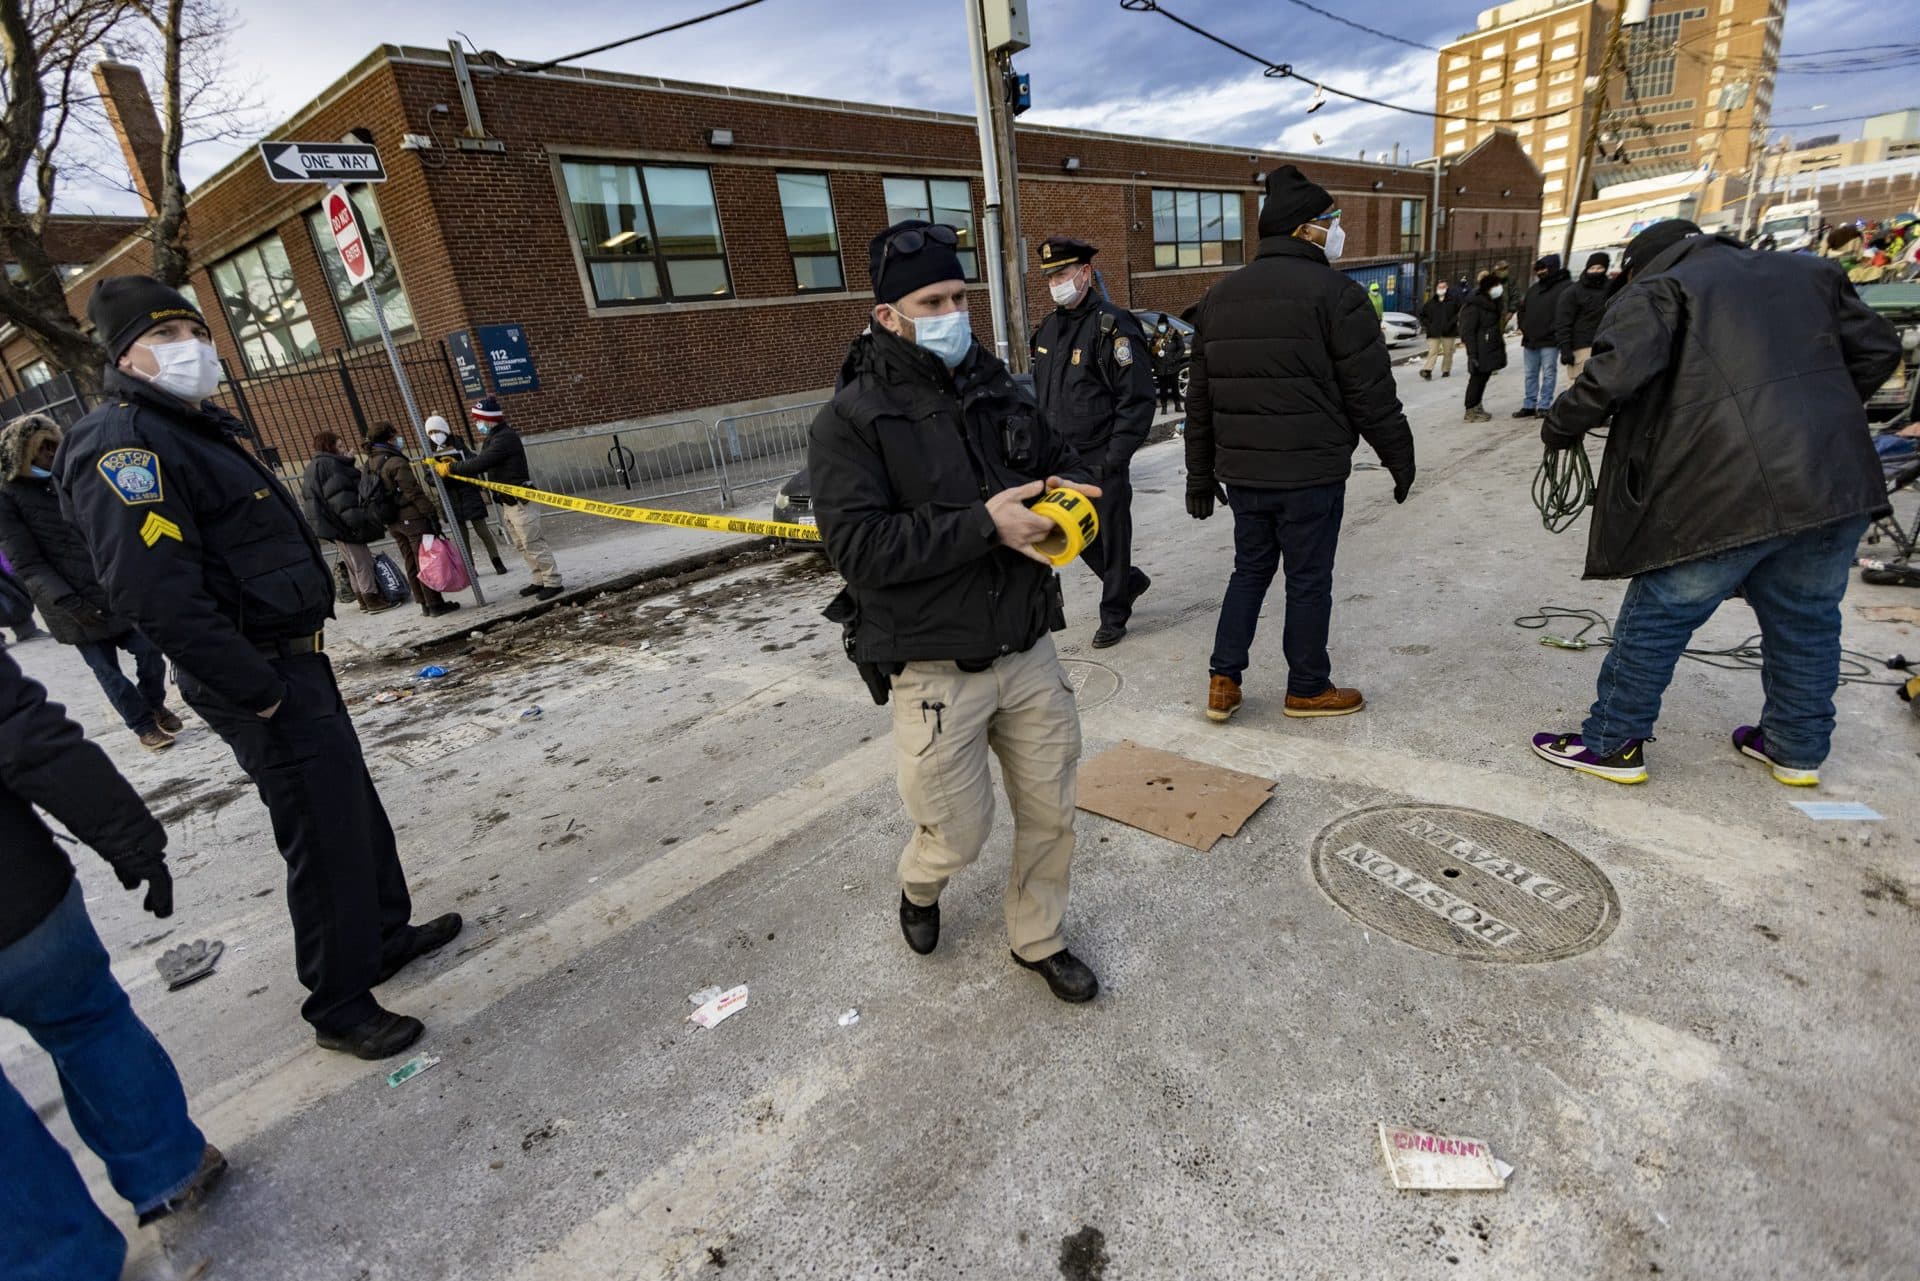 Boston Police block off Atkinson Street with caution tape after they removed the tent inhabitants to remove the dwellings. (Jesse Costa/WBUR)